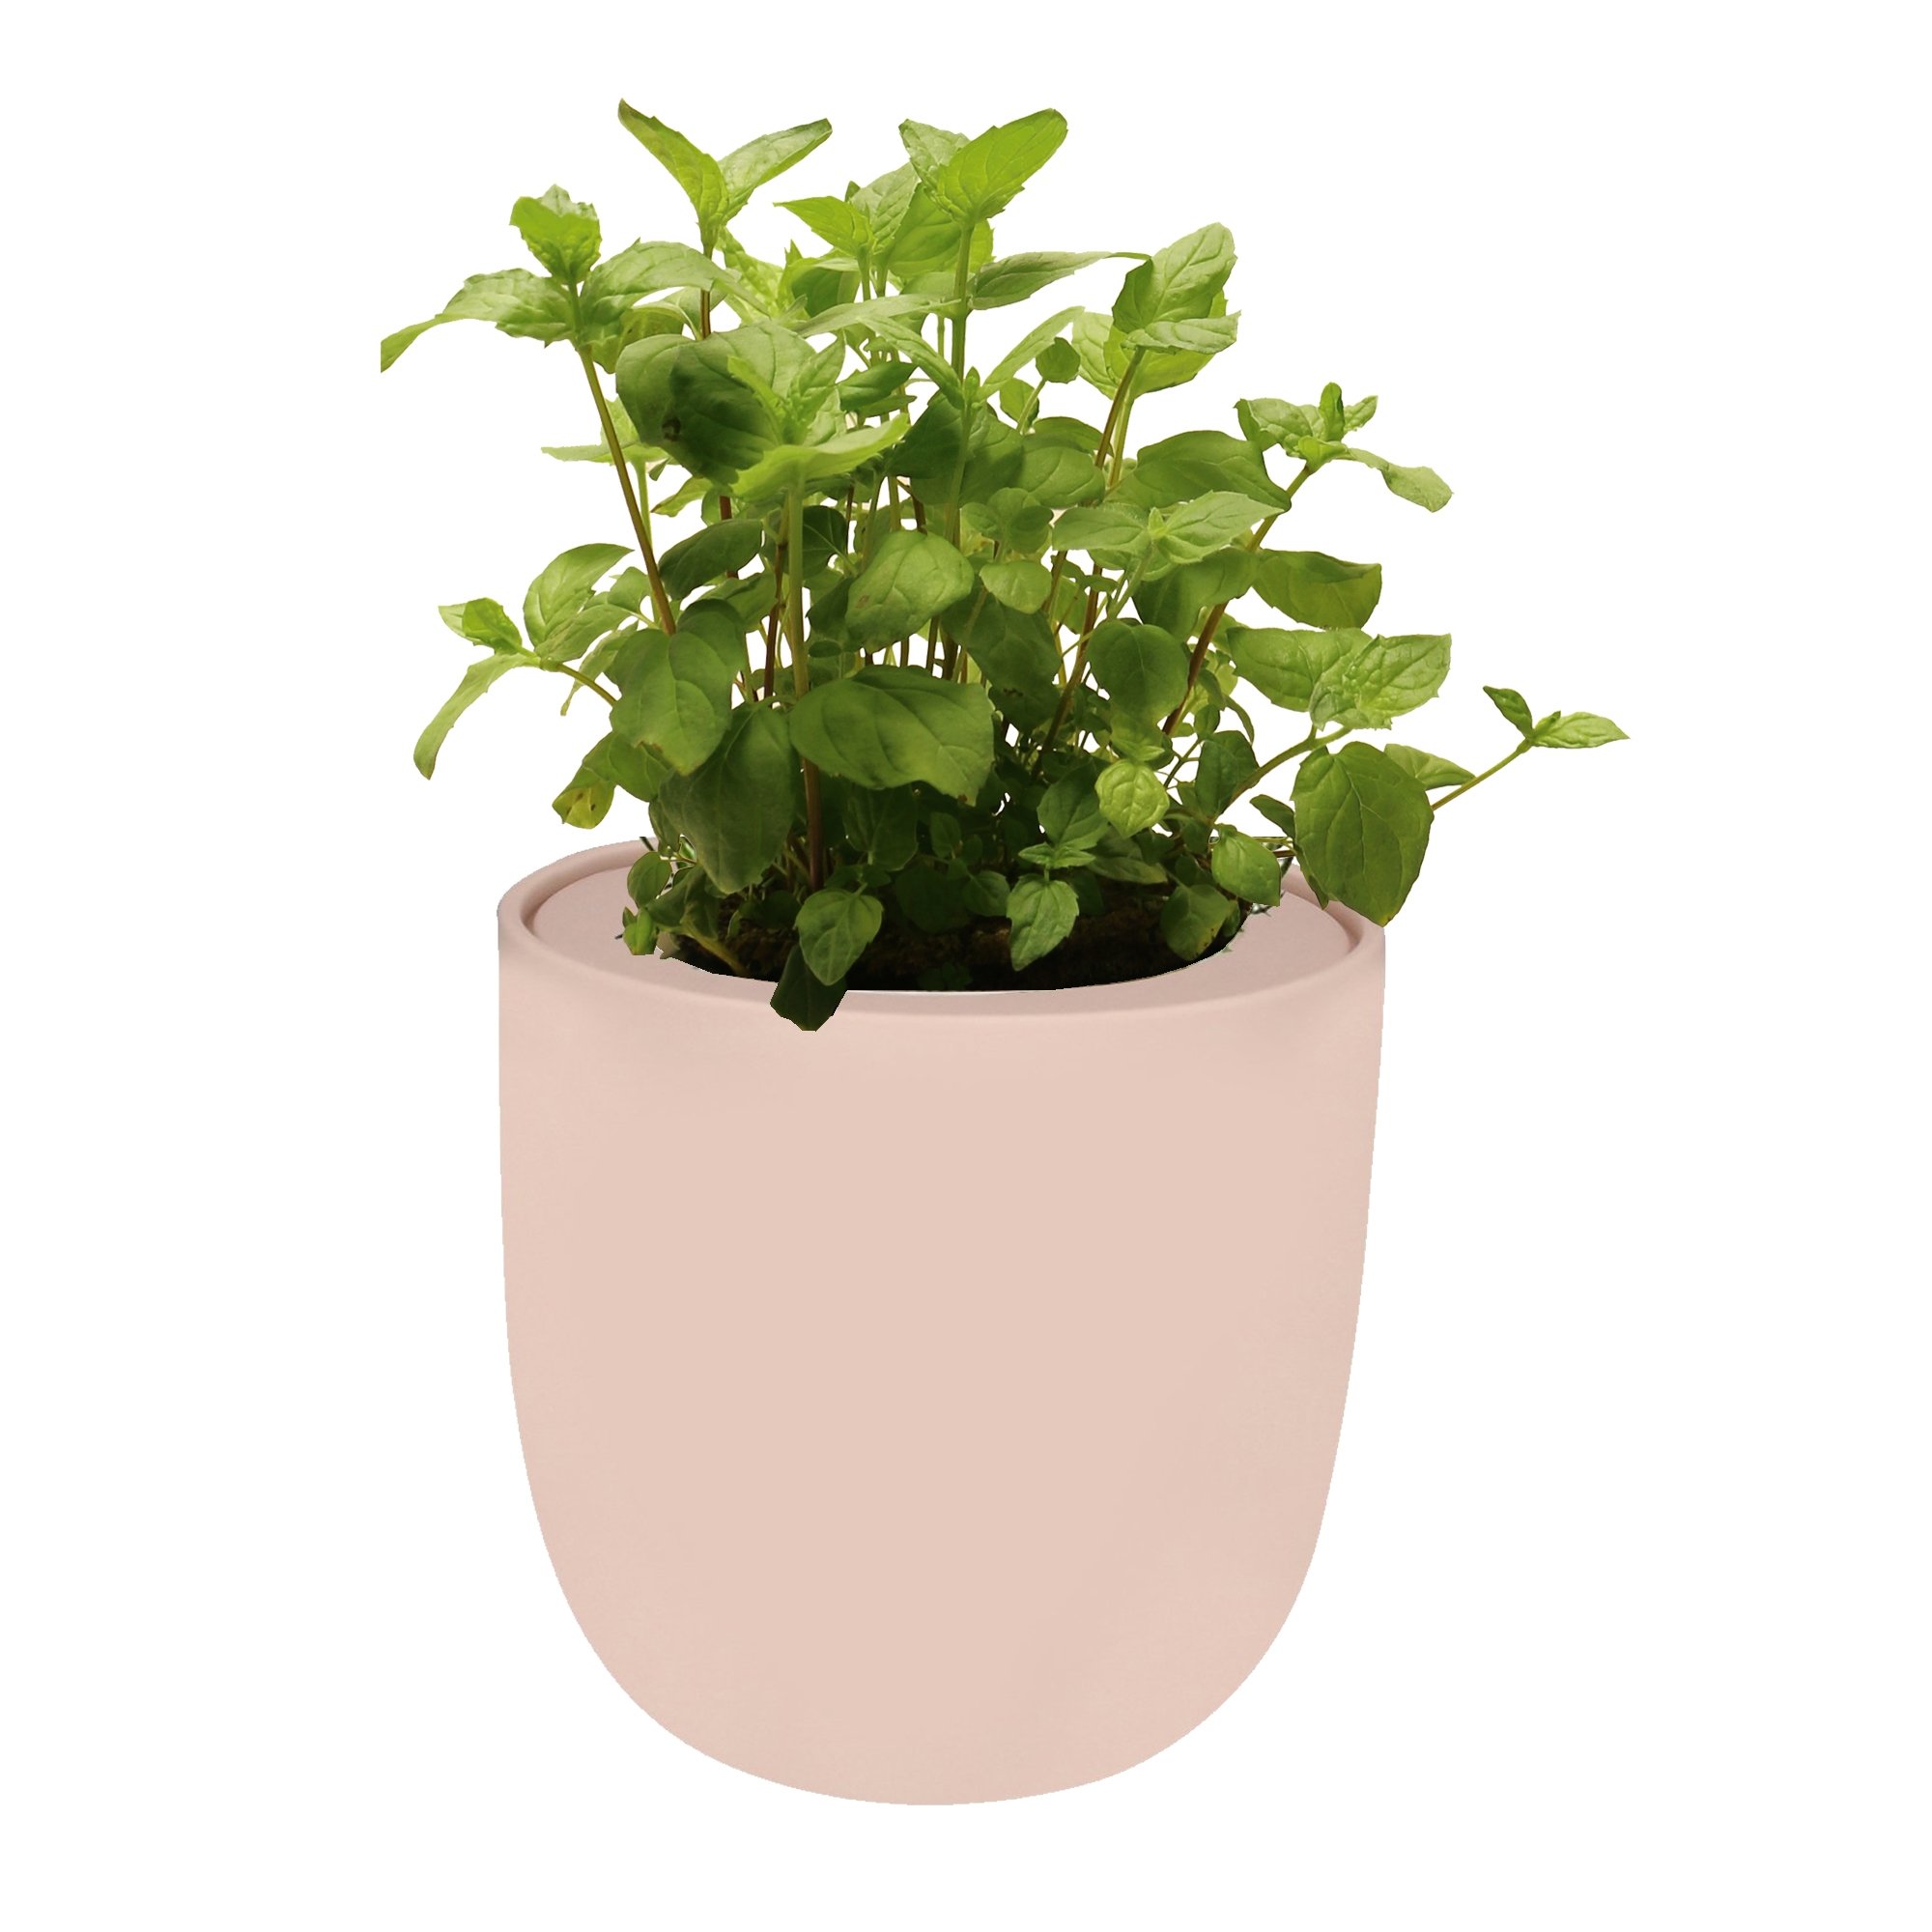 Hydroponic Herb Growing Kit With Pink Ceramic Pot and Organic Seeds (Peppermint)